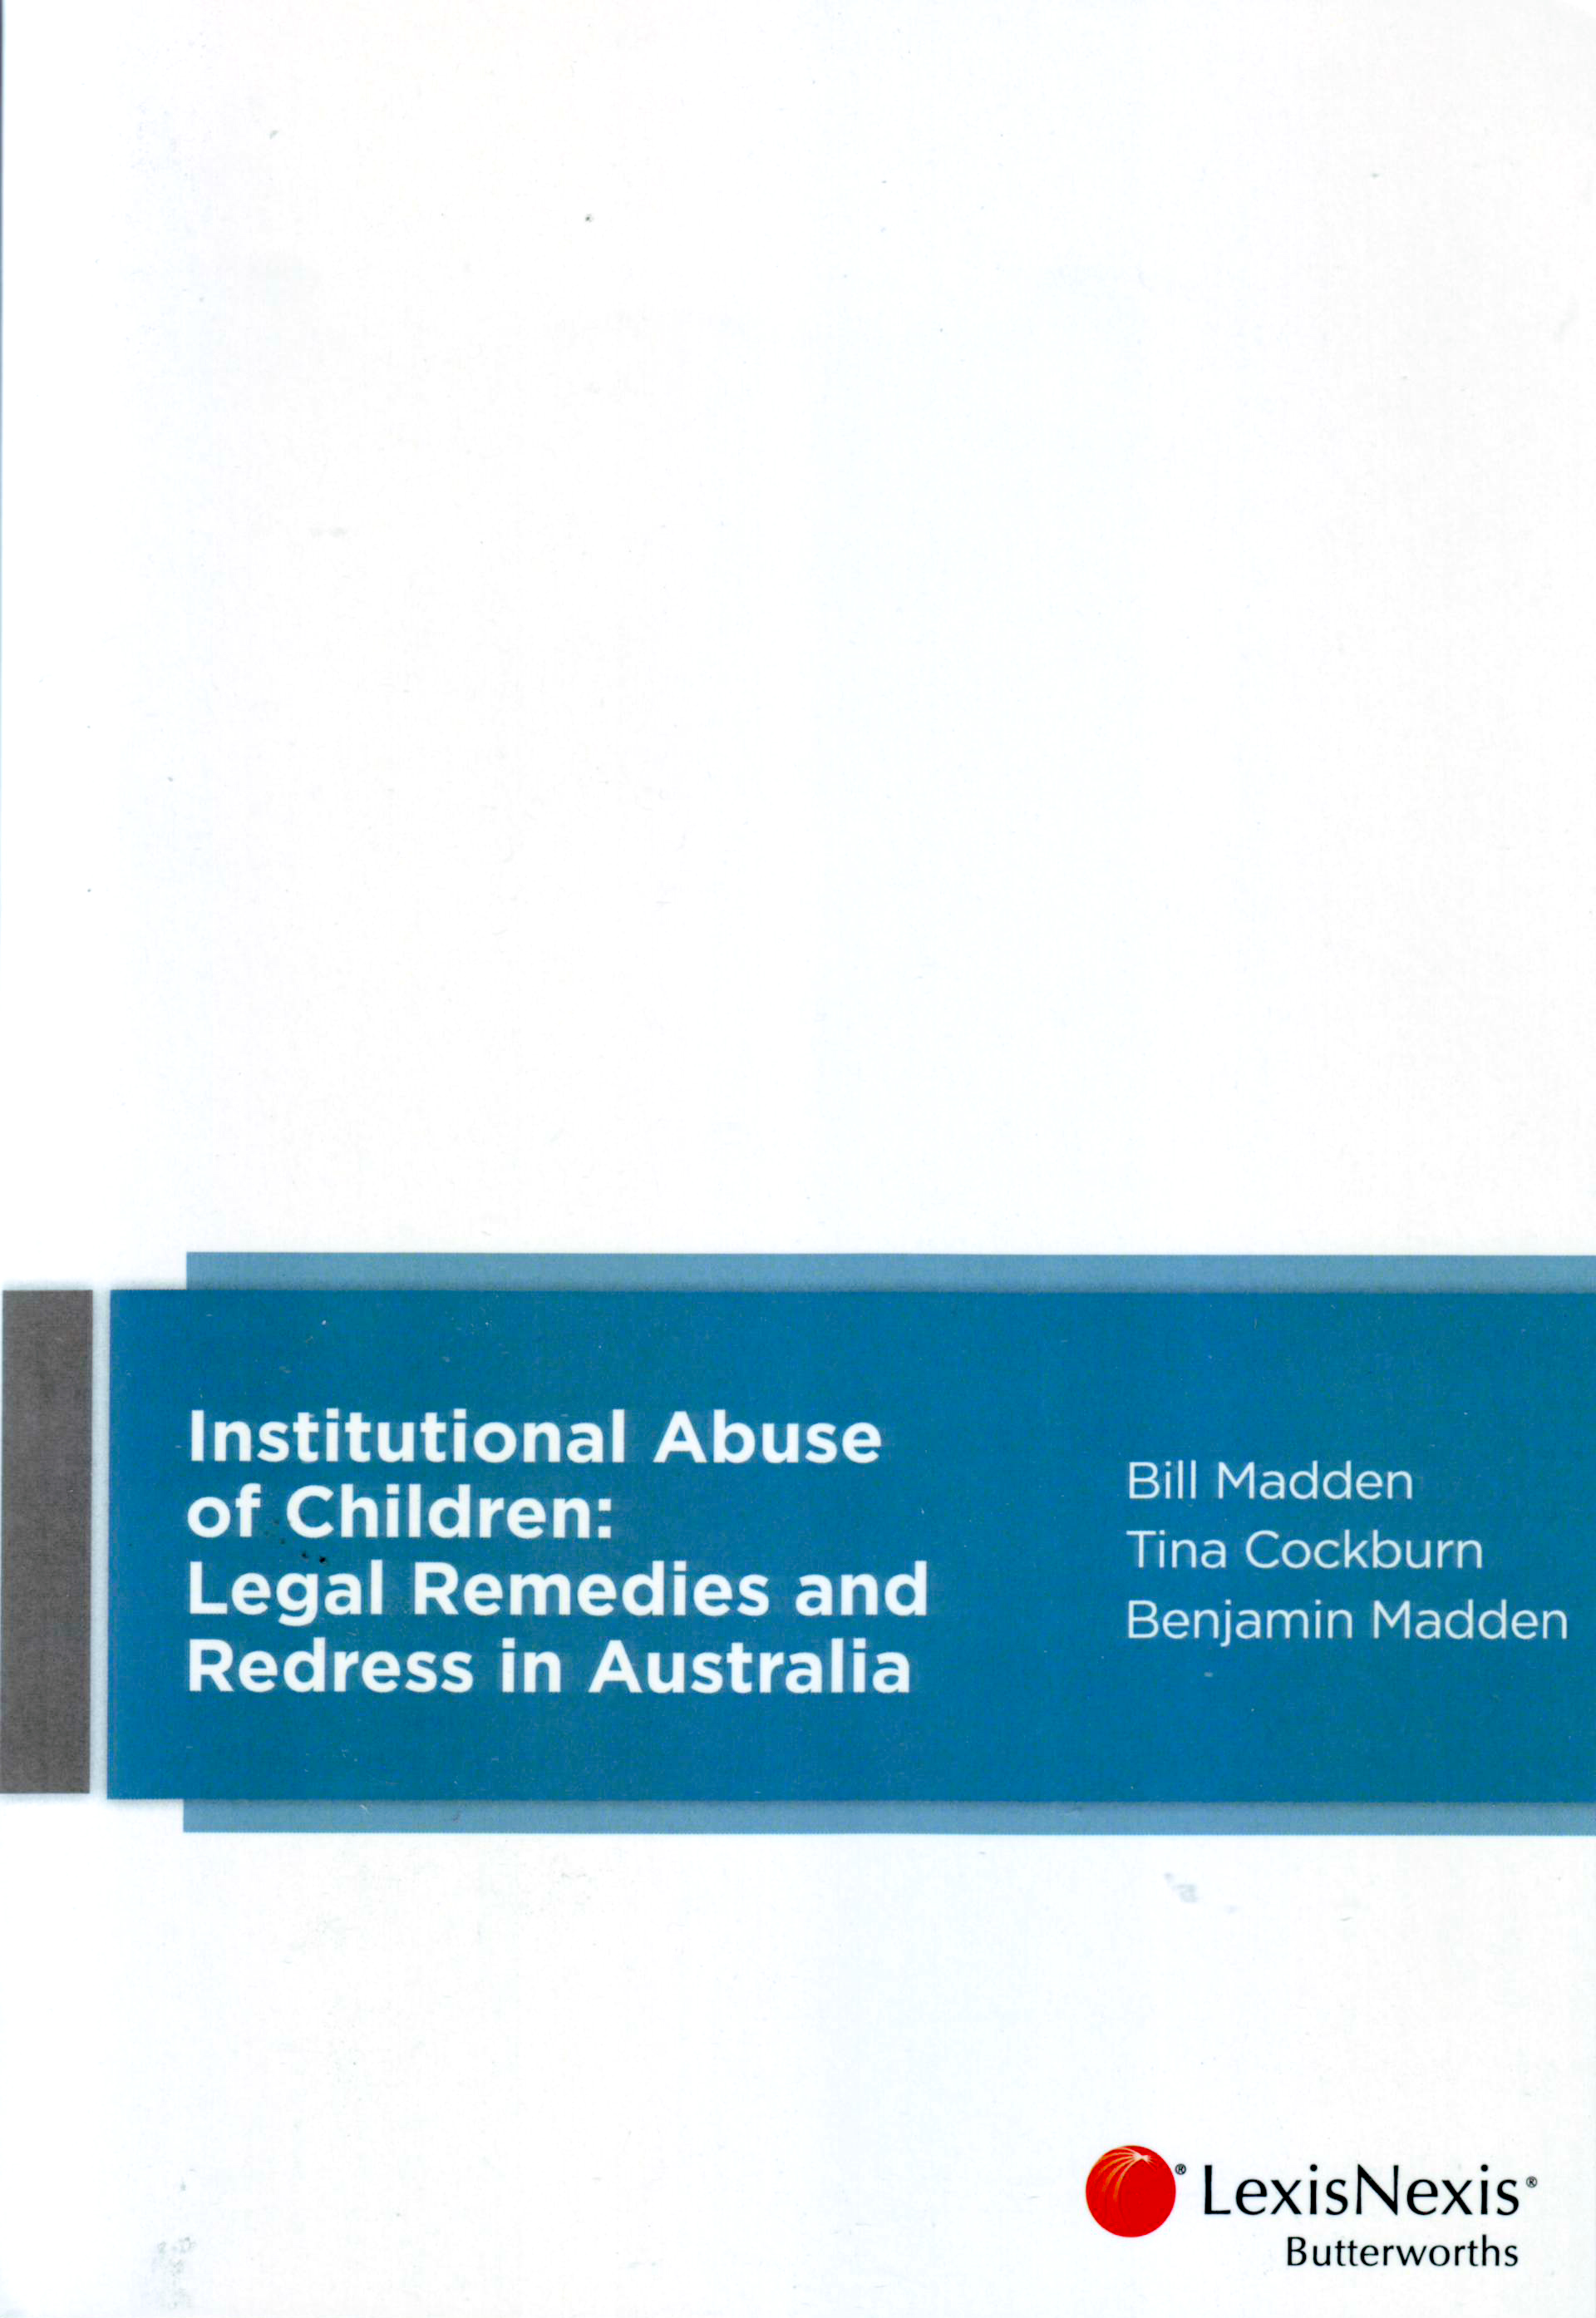 Institutional abuse of children: Legal remedies and redress